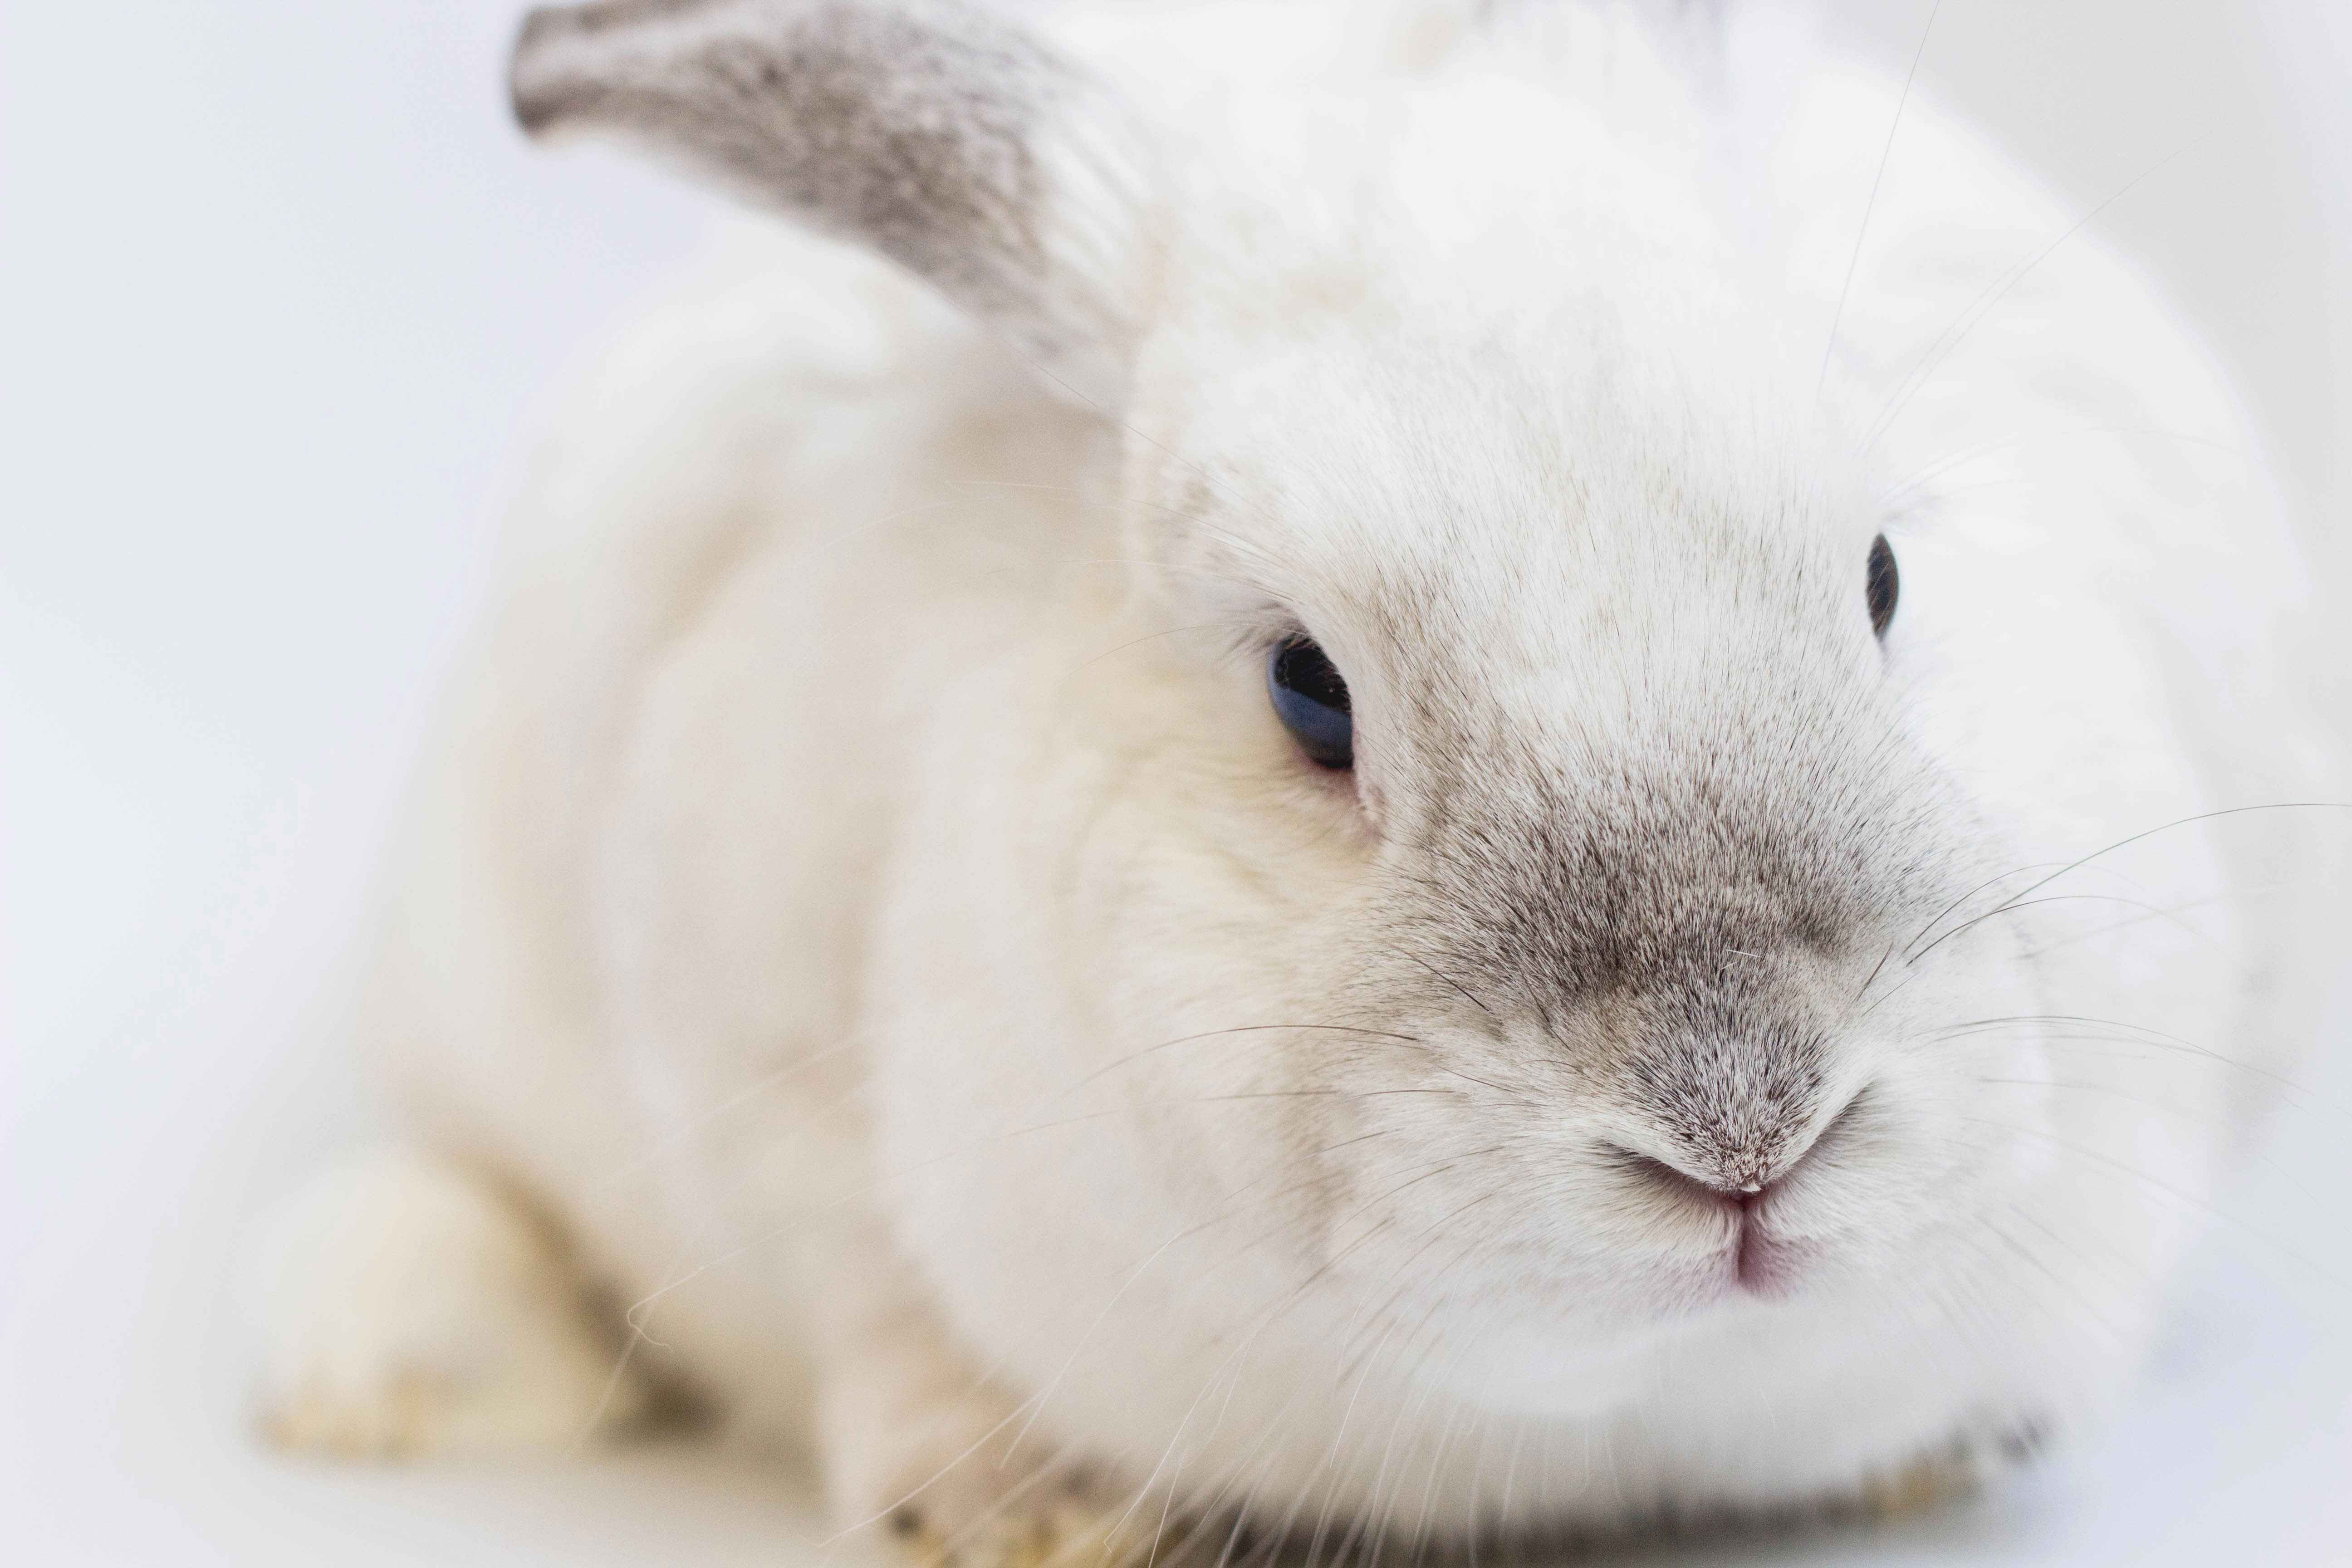 Protecting Your Furniture: Tips to Stop Your Rabbit from Chewing